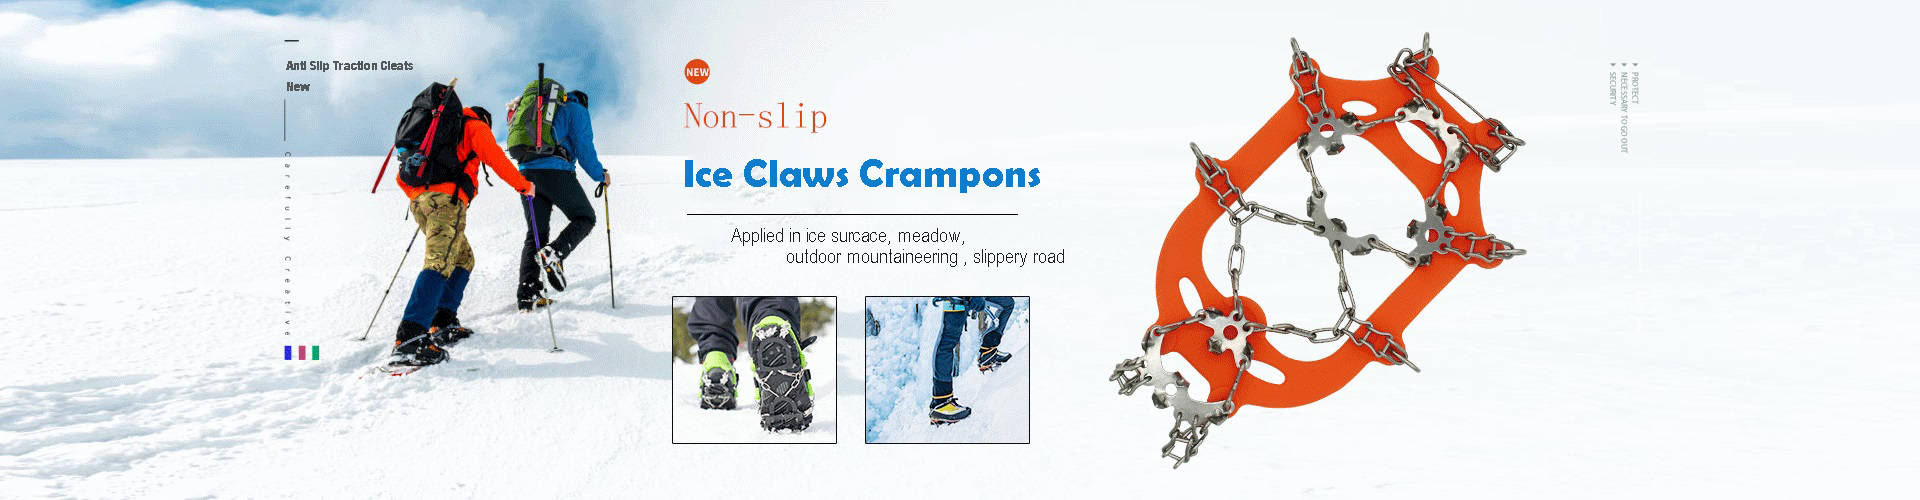 Ice Claws Crampons